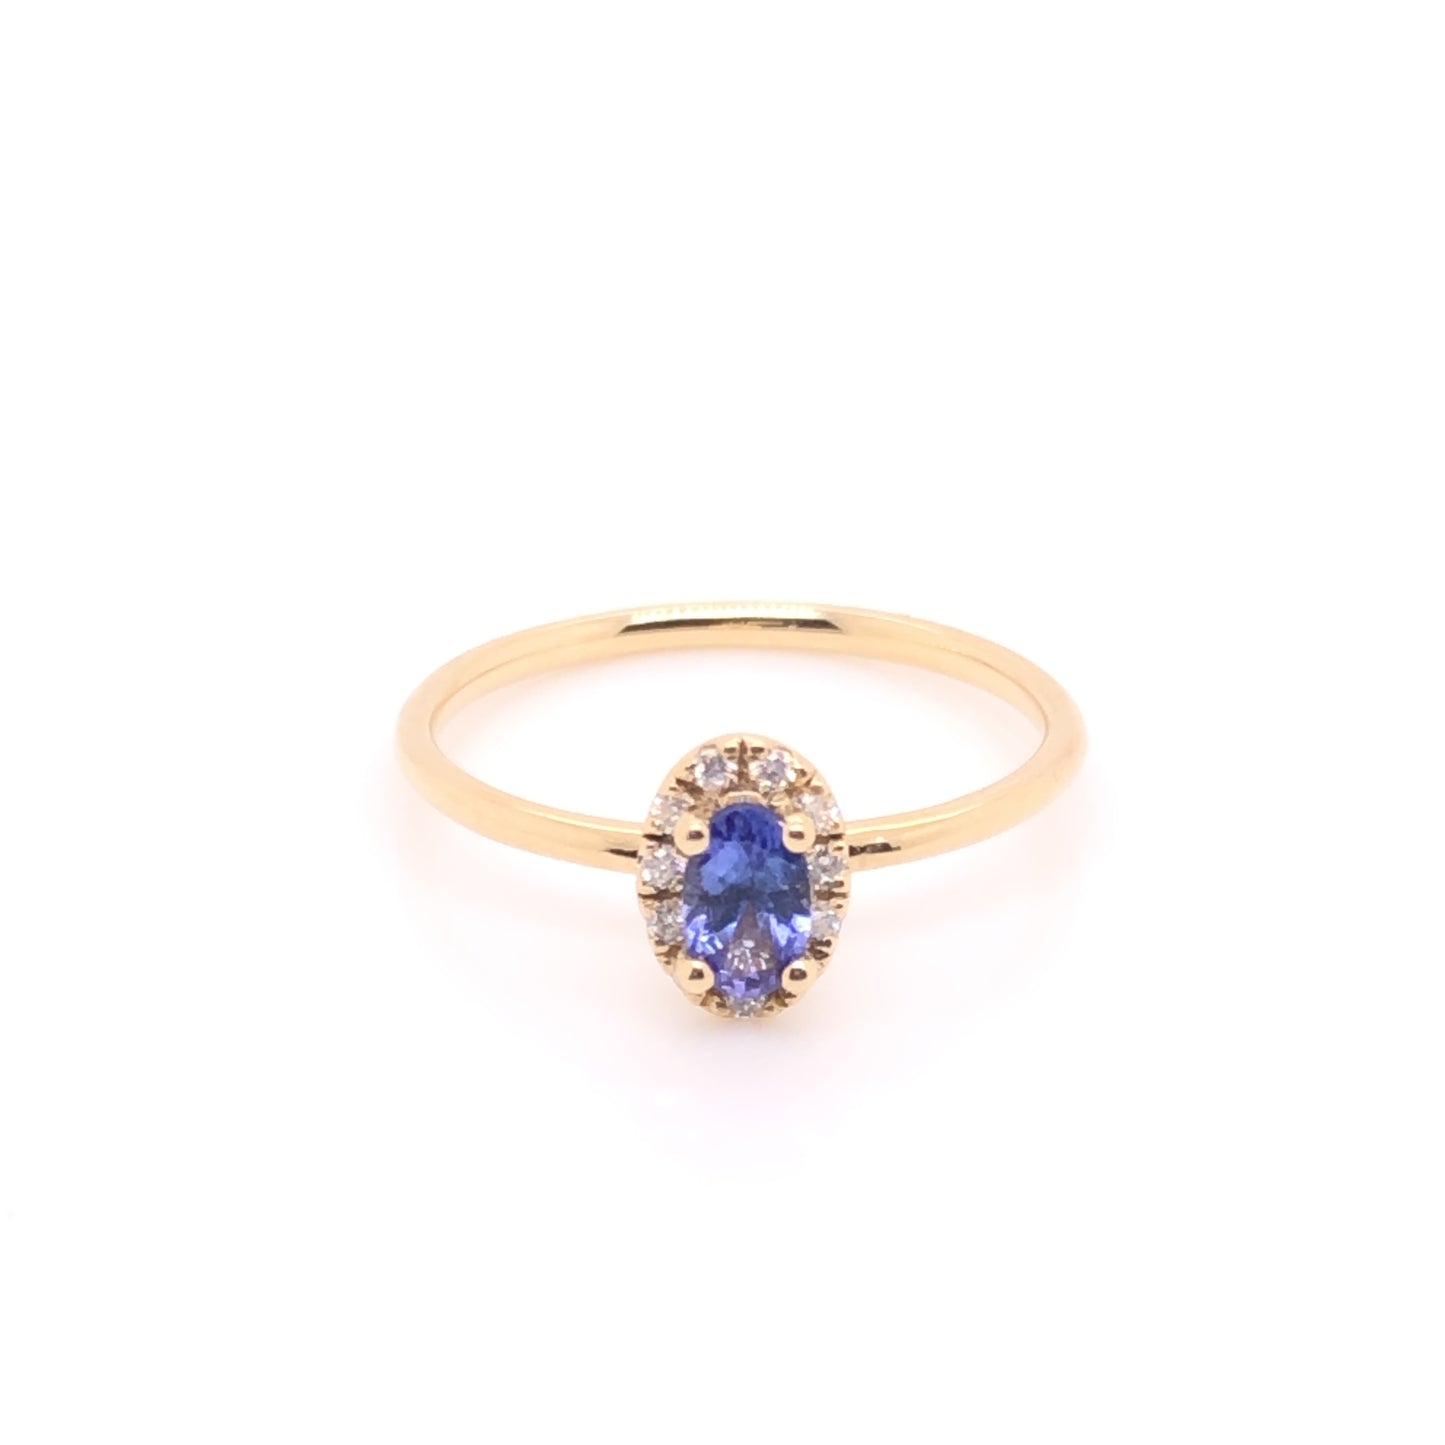 IMMEDIATE DELIVERY / Tanzanite Ring with Diamond Halo / 14k Yellow Gold / Size 5.75